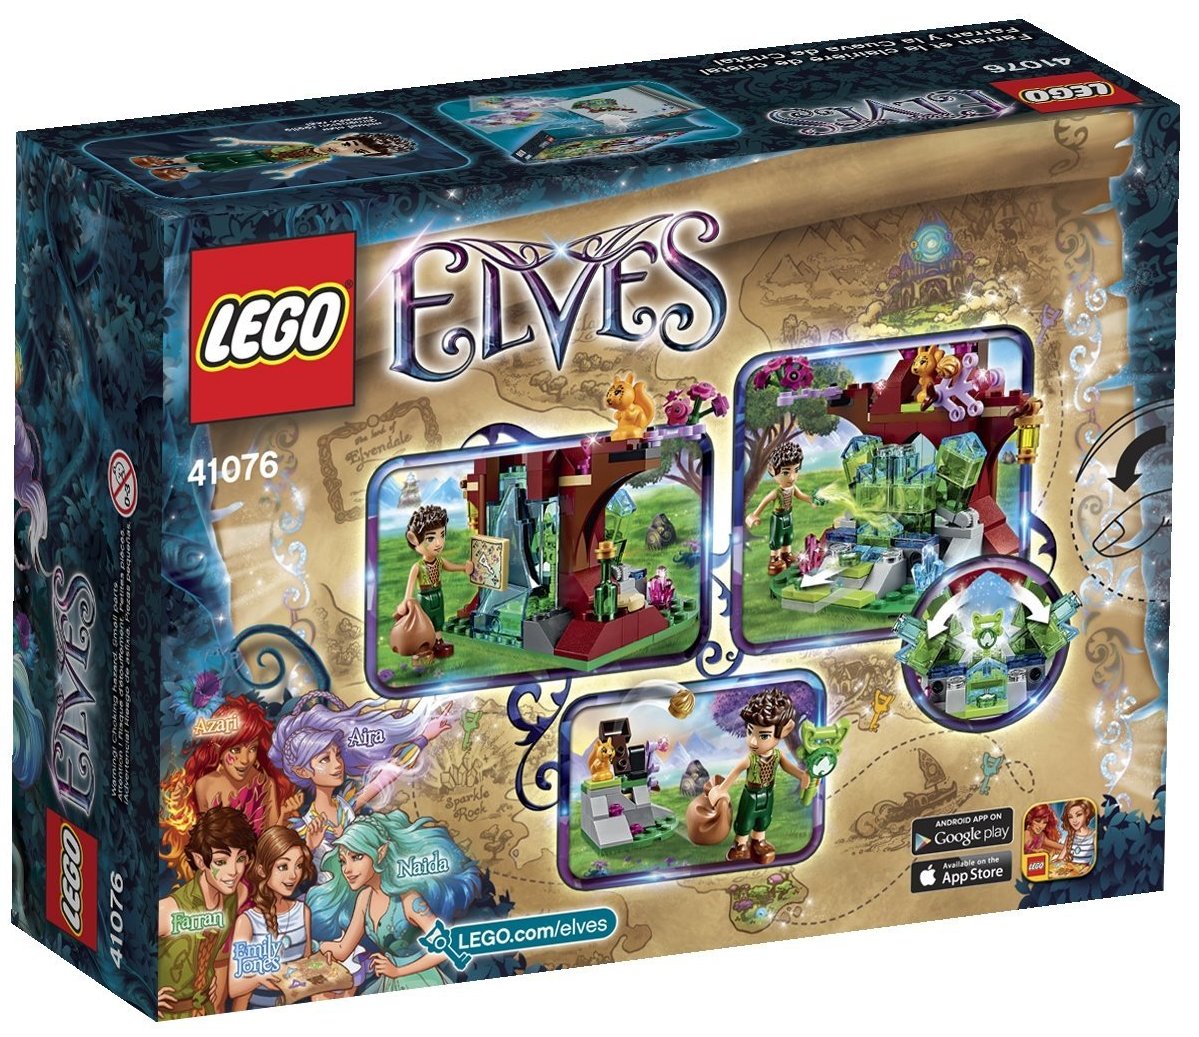 LEGO Elves Sets Released Early & Now Available! - Bricks and Bloks